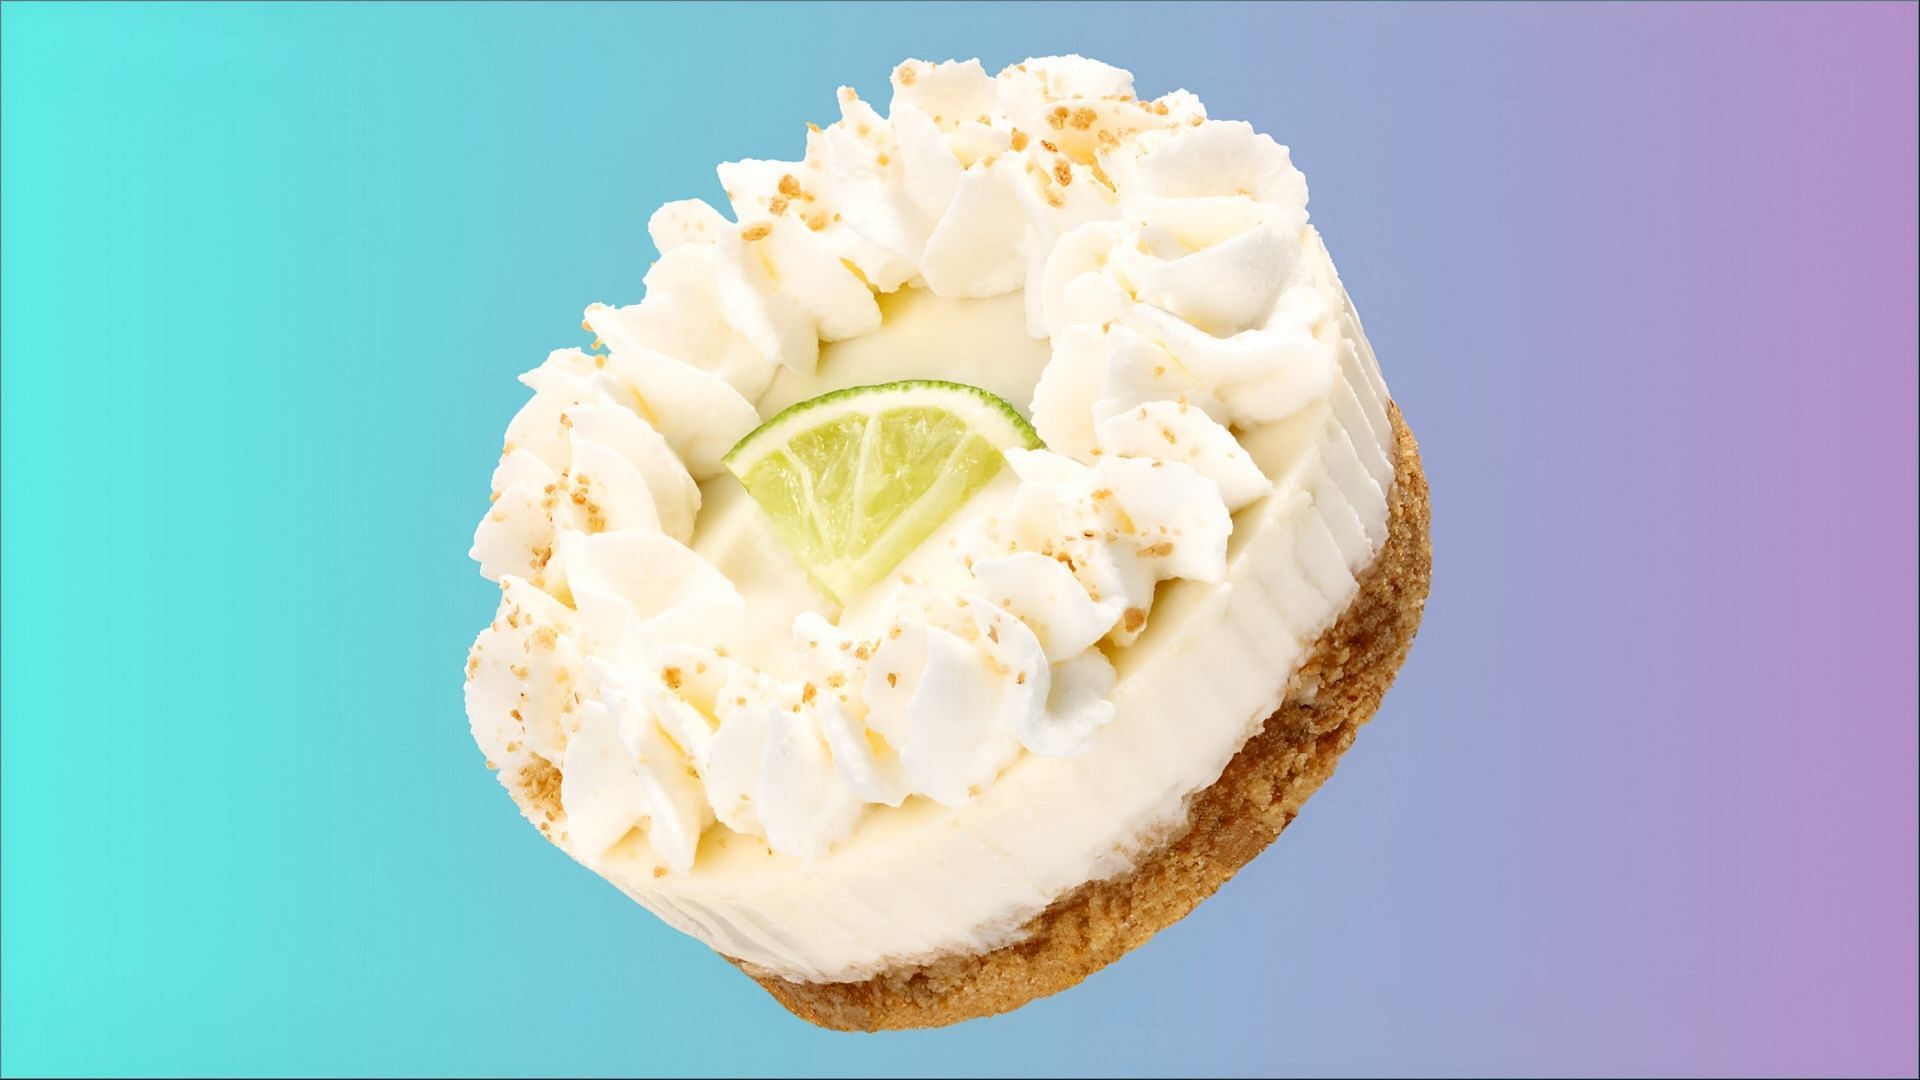 The Key Lime Pie is exclusive to the U.S. and Canada (Image via Crumbl)